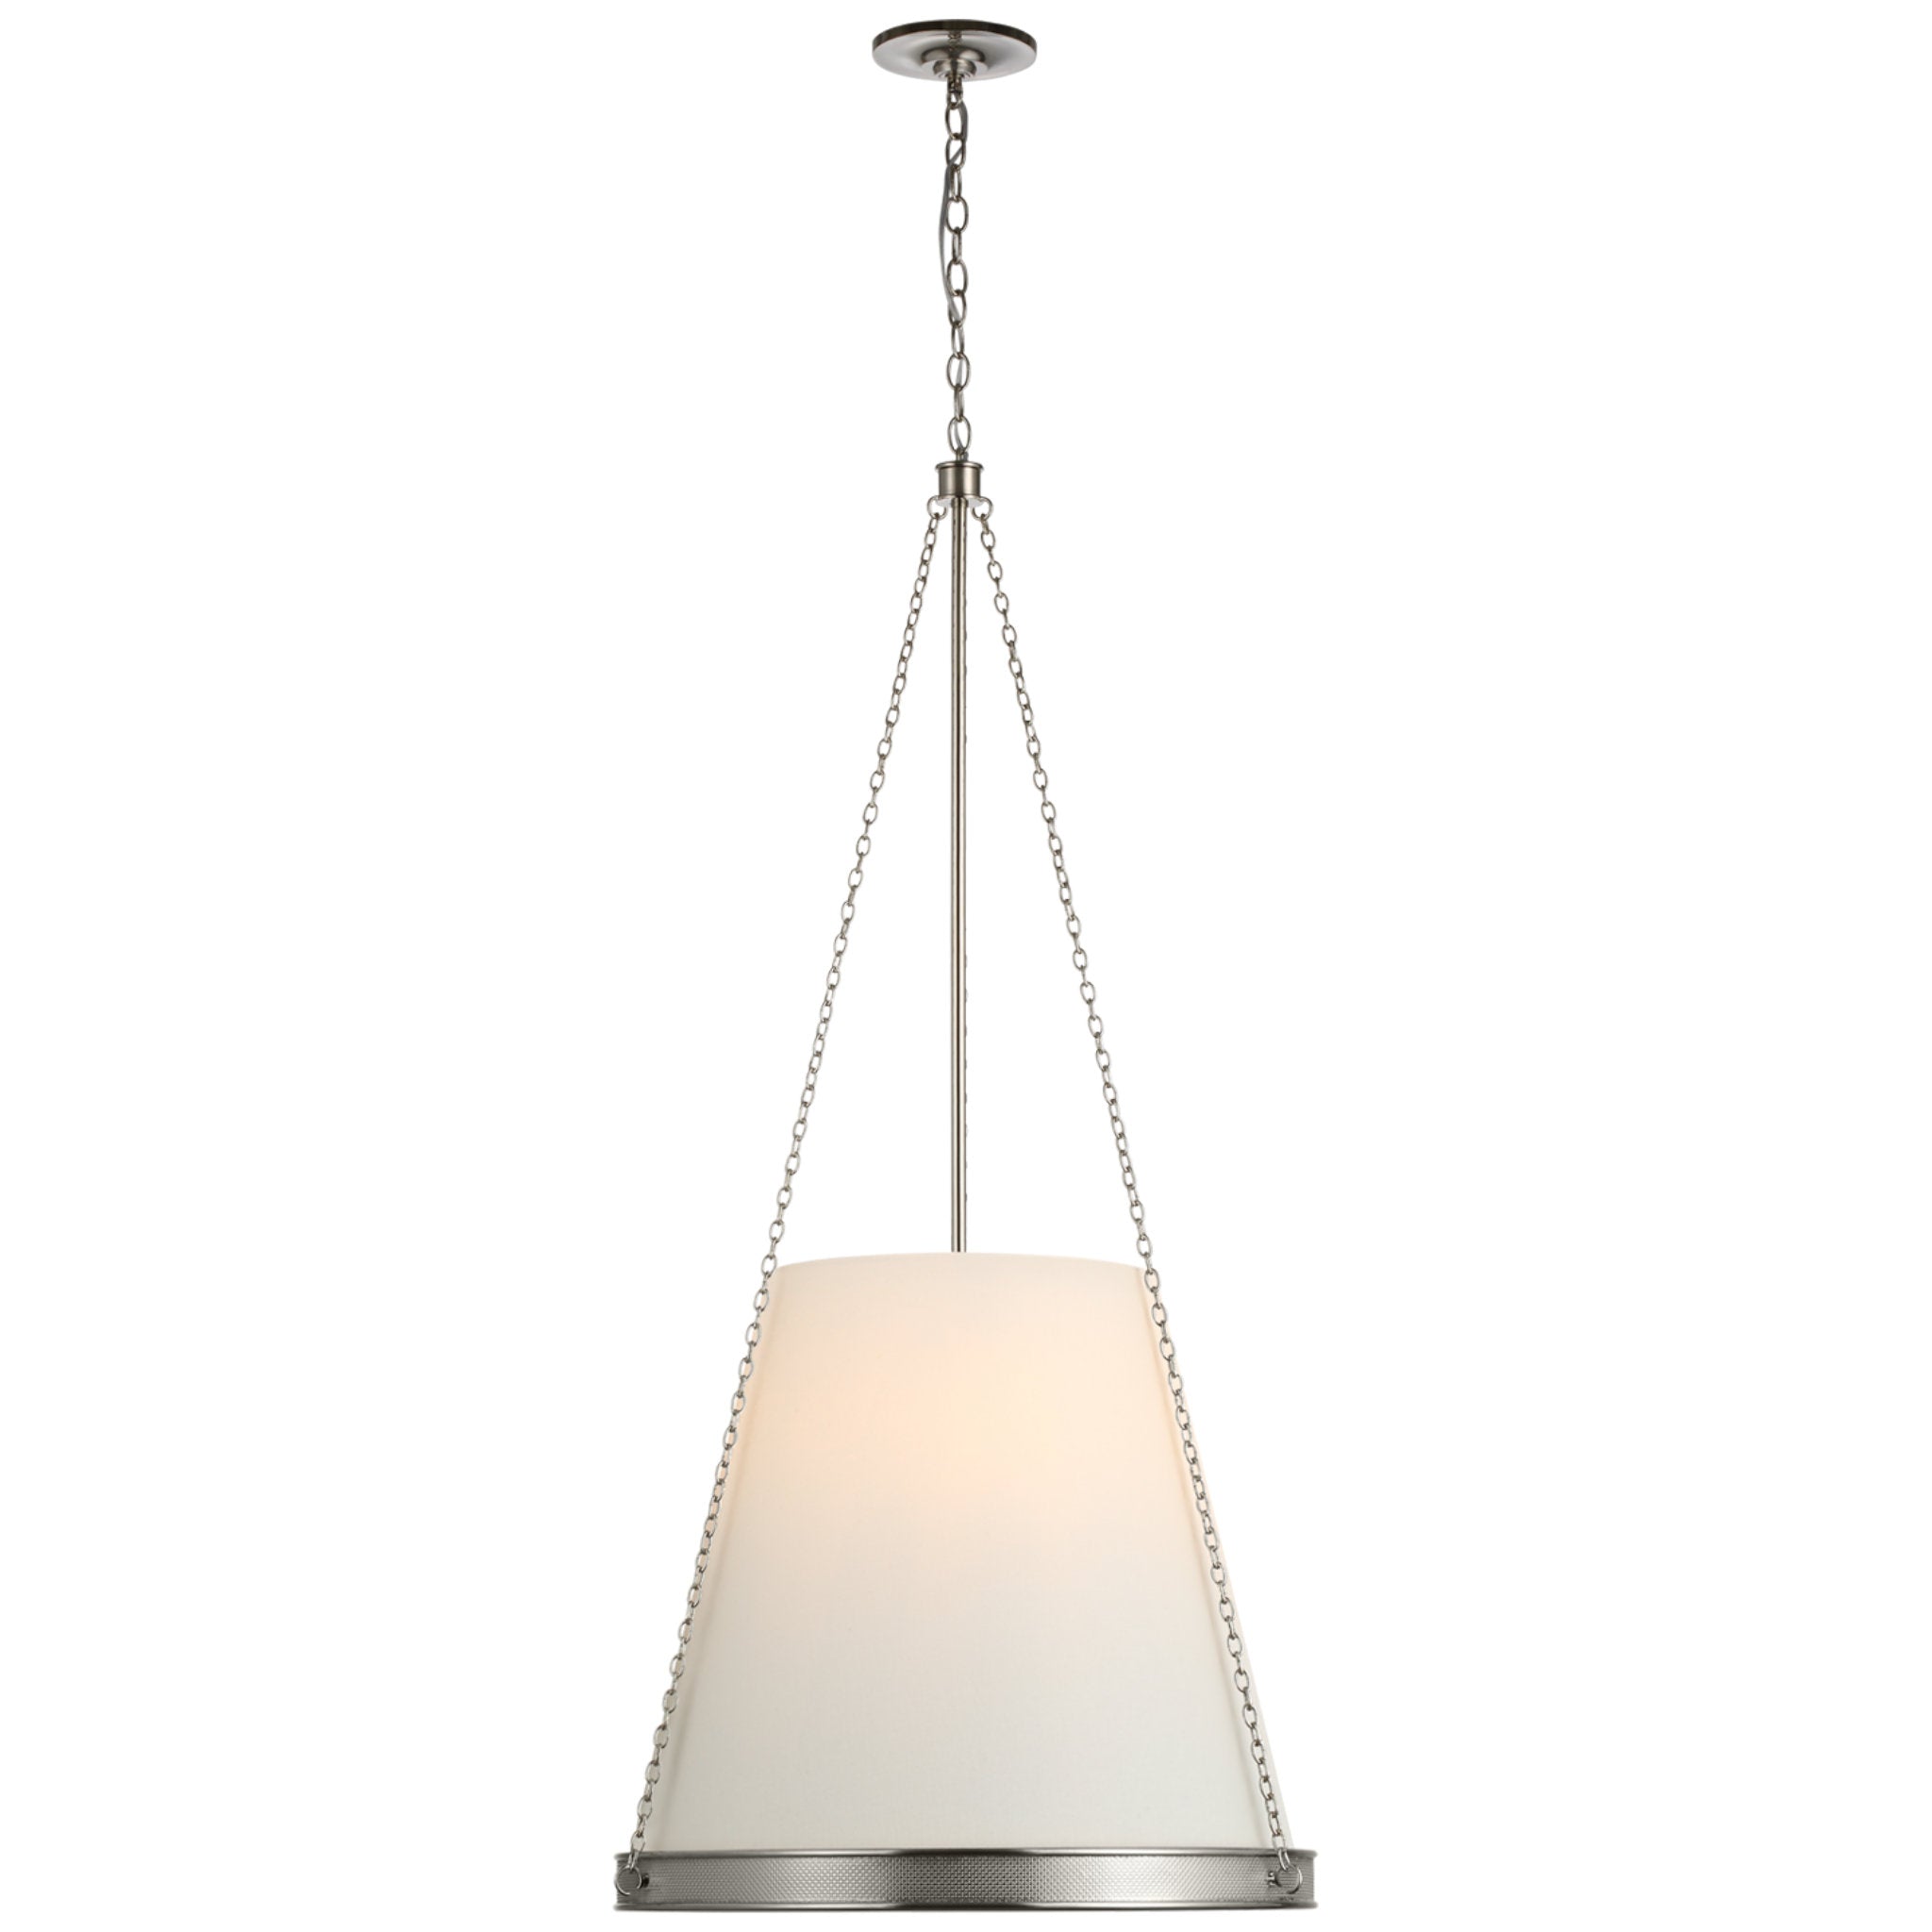 Marie Flanigan Reese 22" Pendant in Polished Nickel with Linen Shade